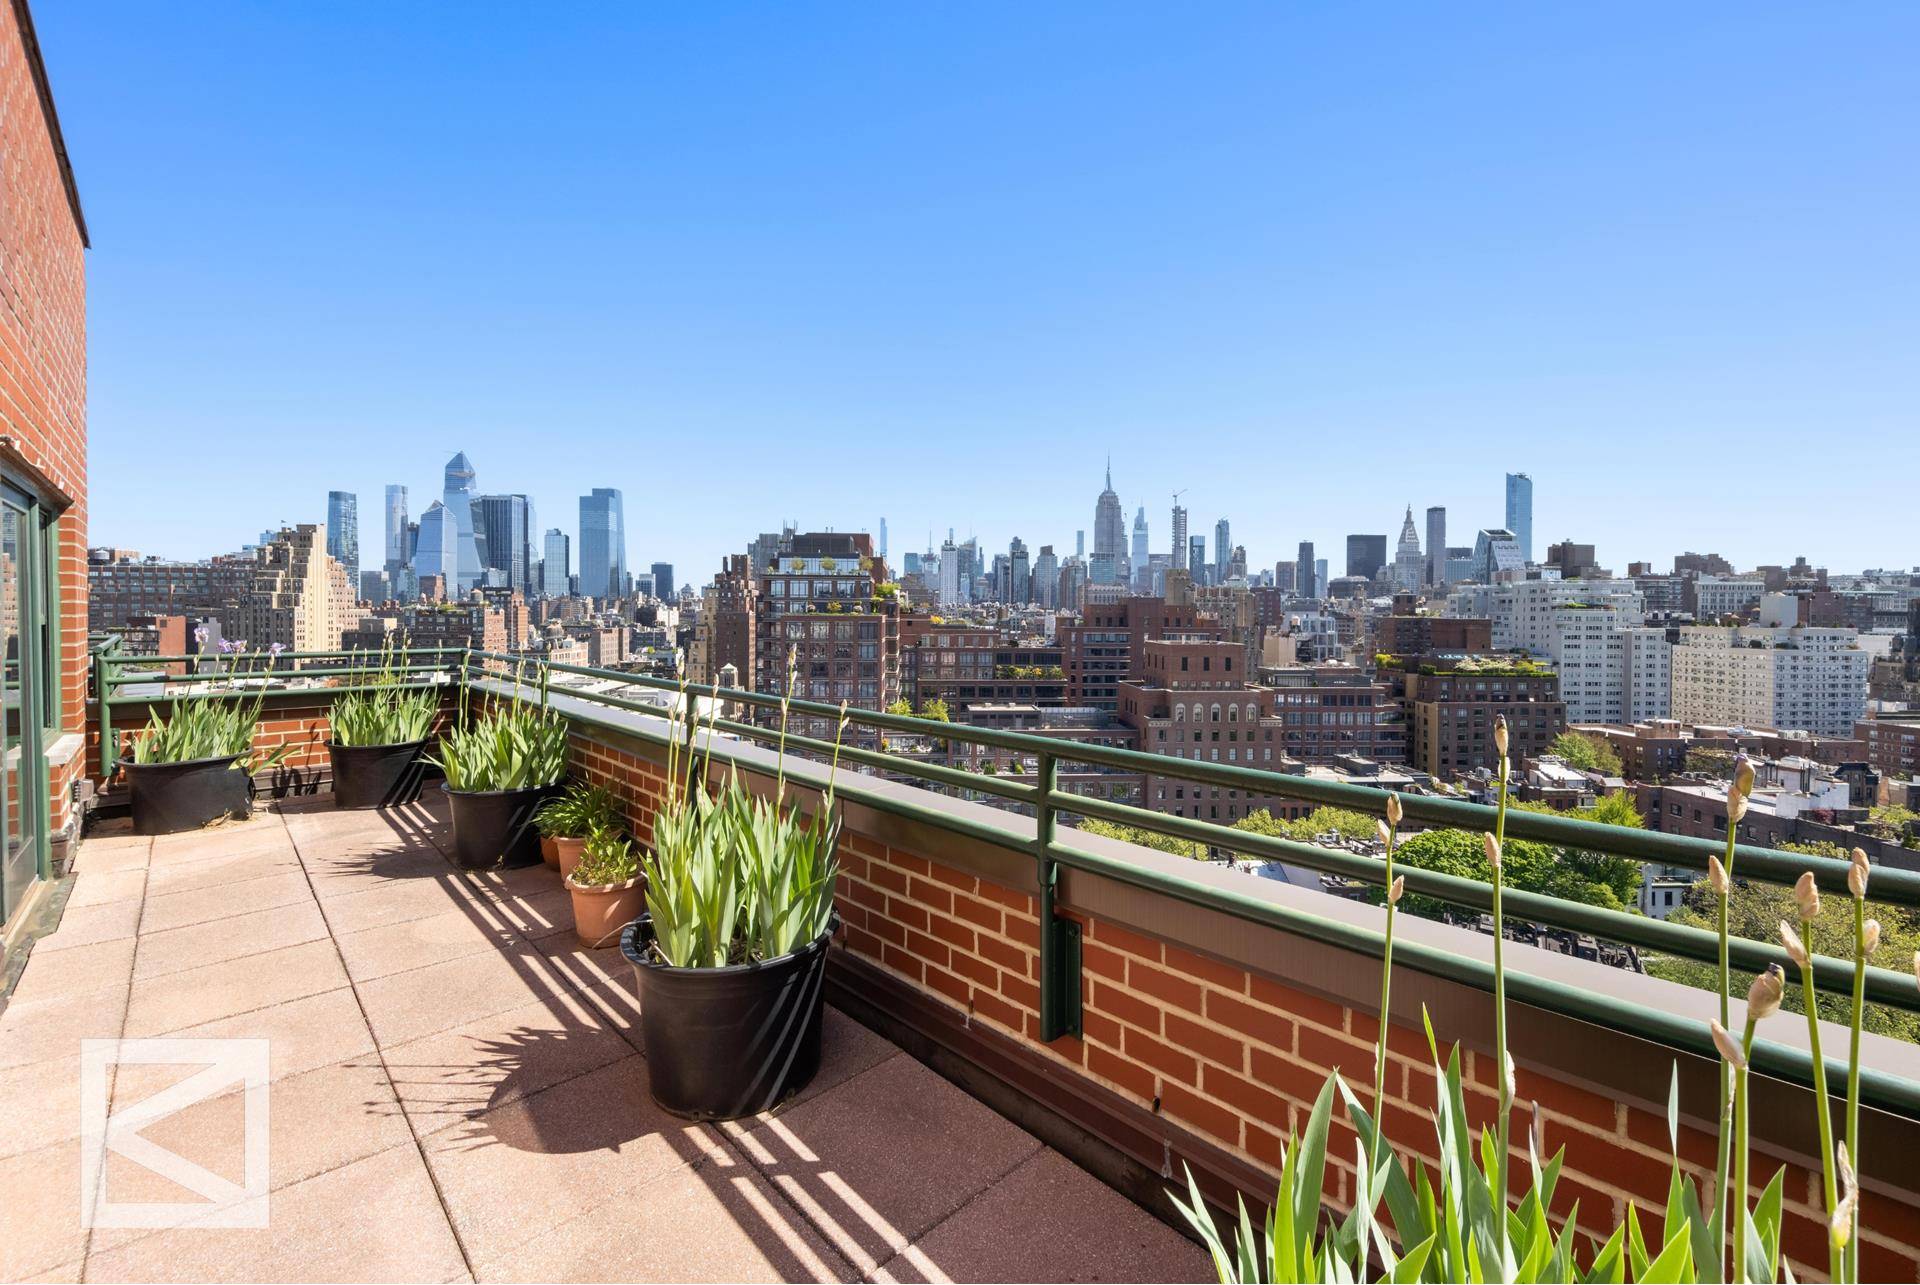 Situated on one of the most desirable blocks in the West Village, this penthouse residence offers unparalleled views in the heart of the neighborhood.